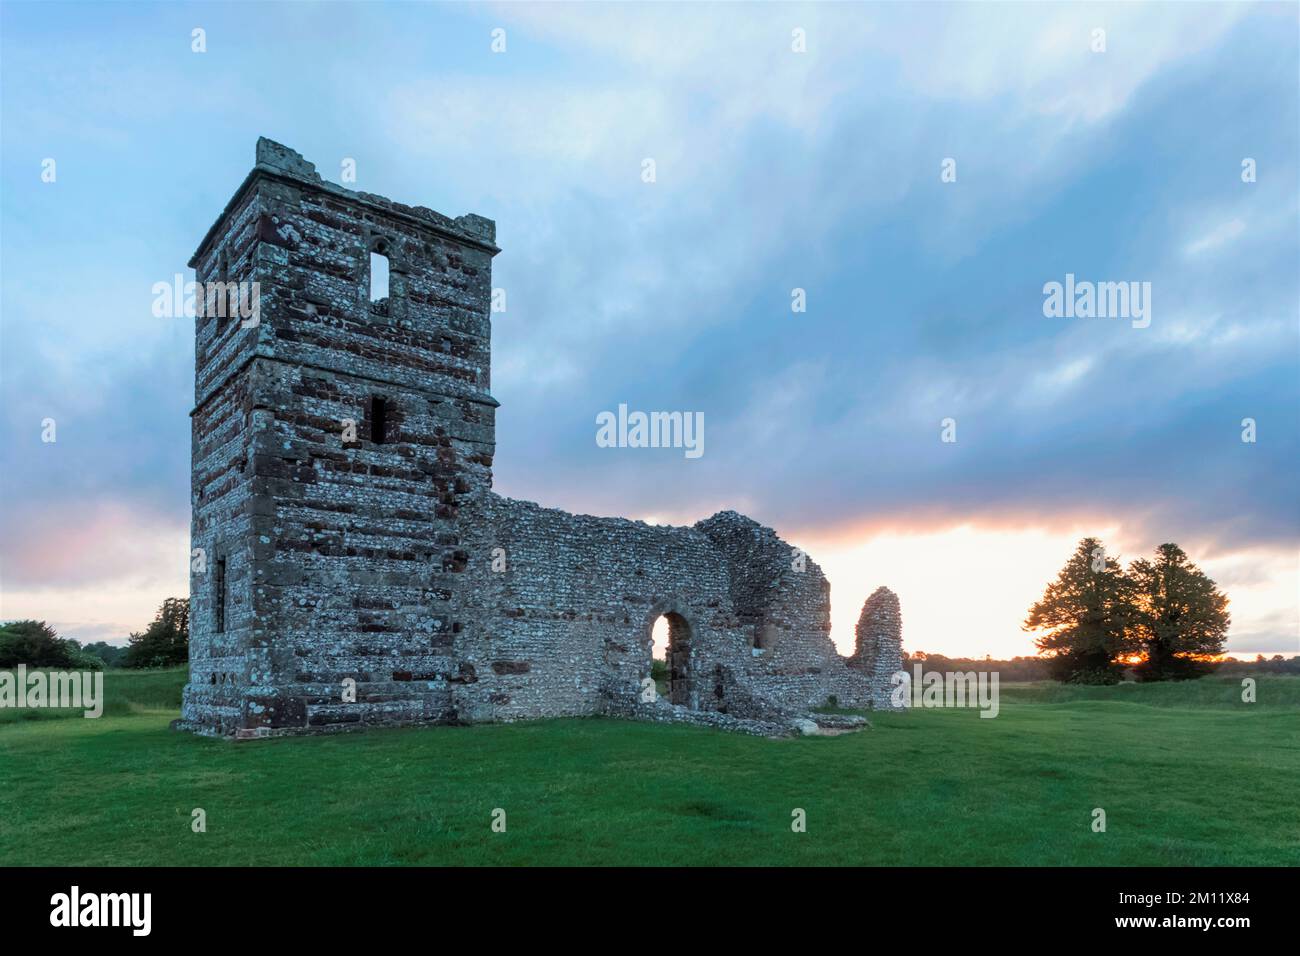 England, Dorset, The Ruins of Knowlton Church and Earthworks near Wimbourne Minster at Sunrise Stock Photo